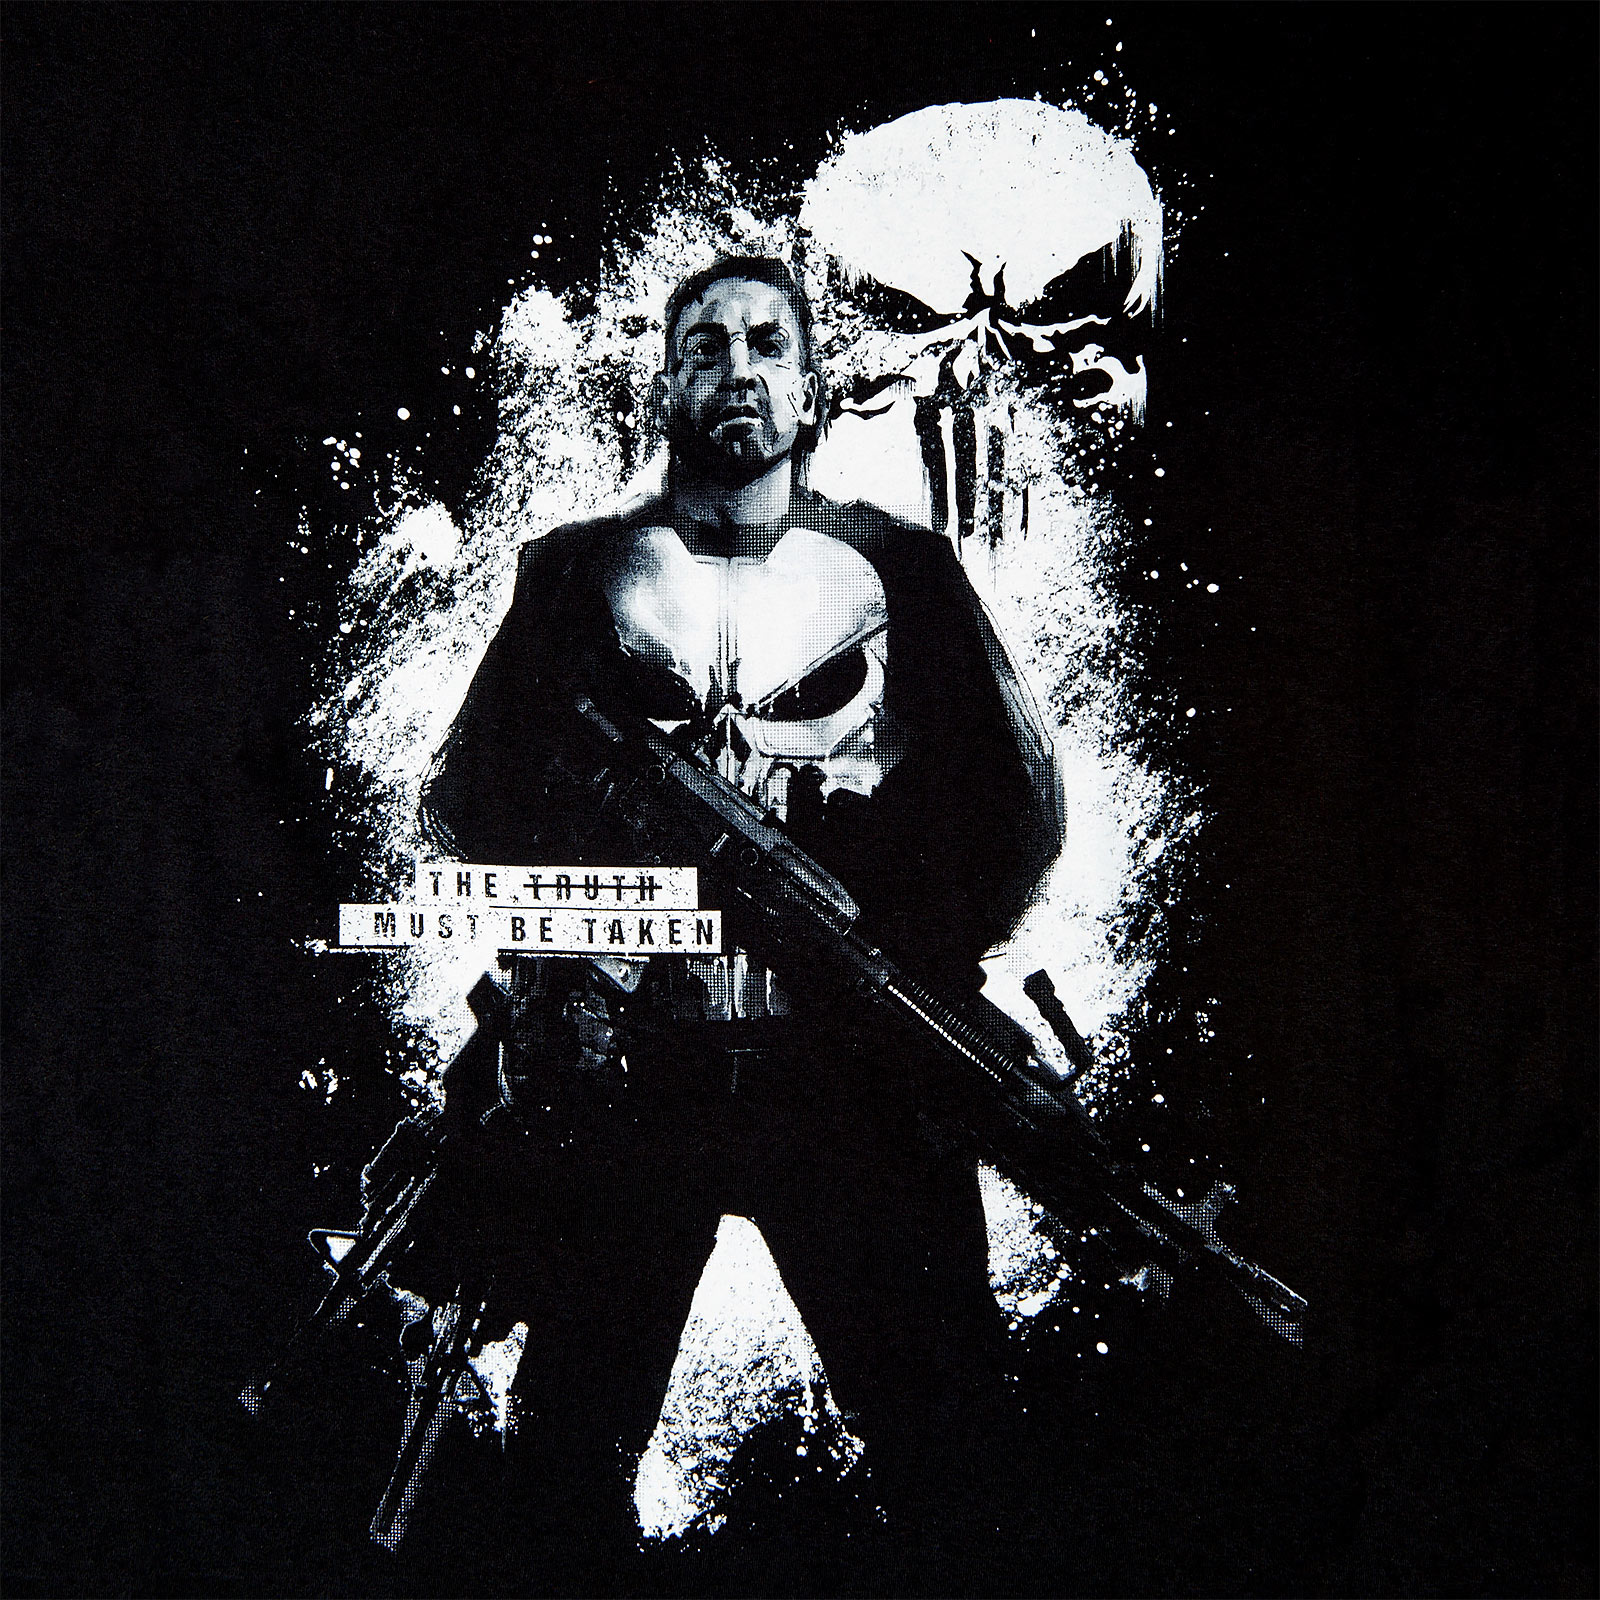 Punisher - The Truth T-Shirt black